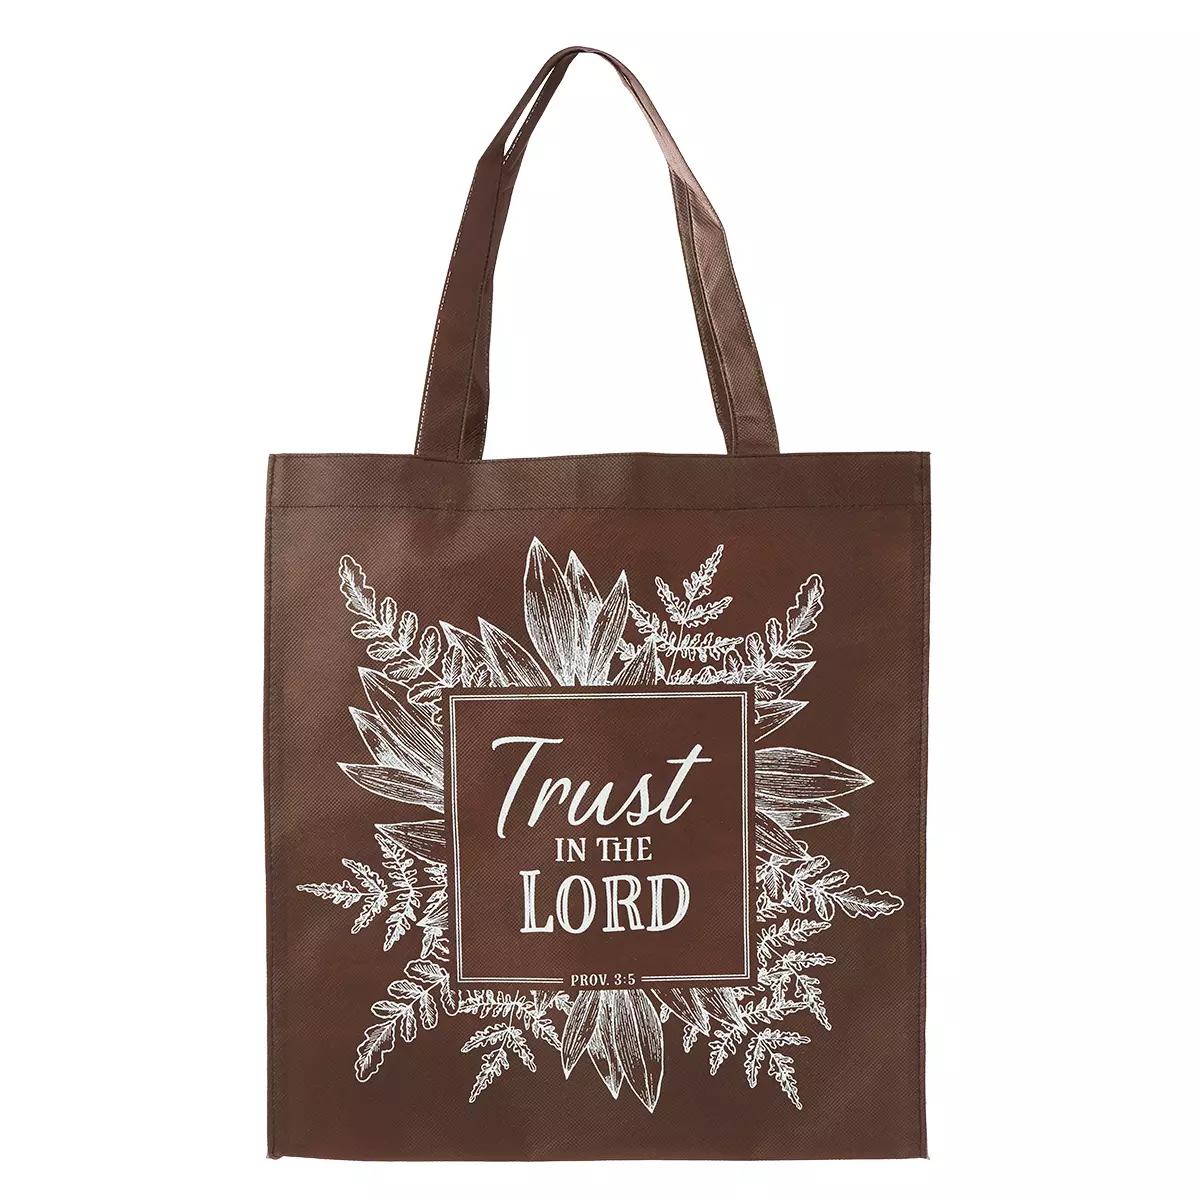 Tote Brown Trust in the Lord Prov. 3:5